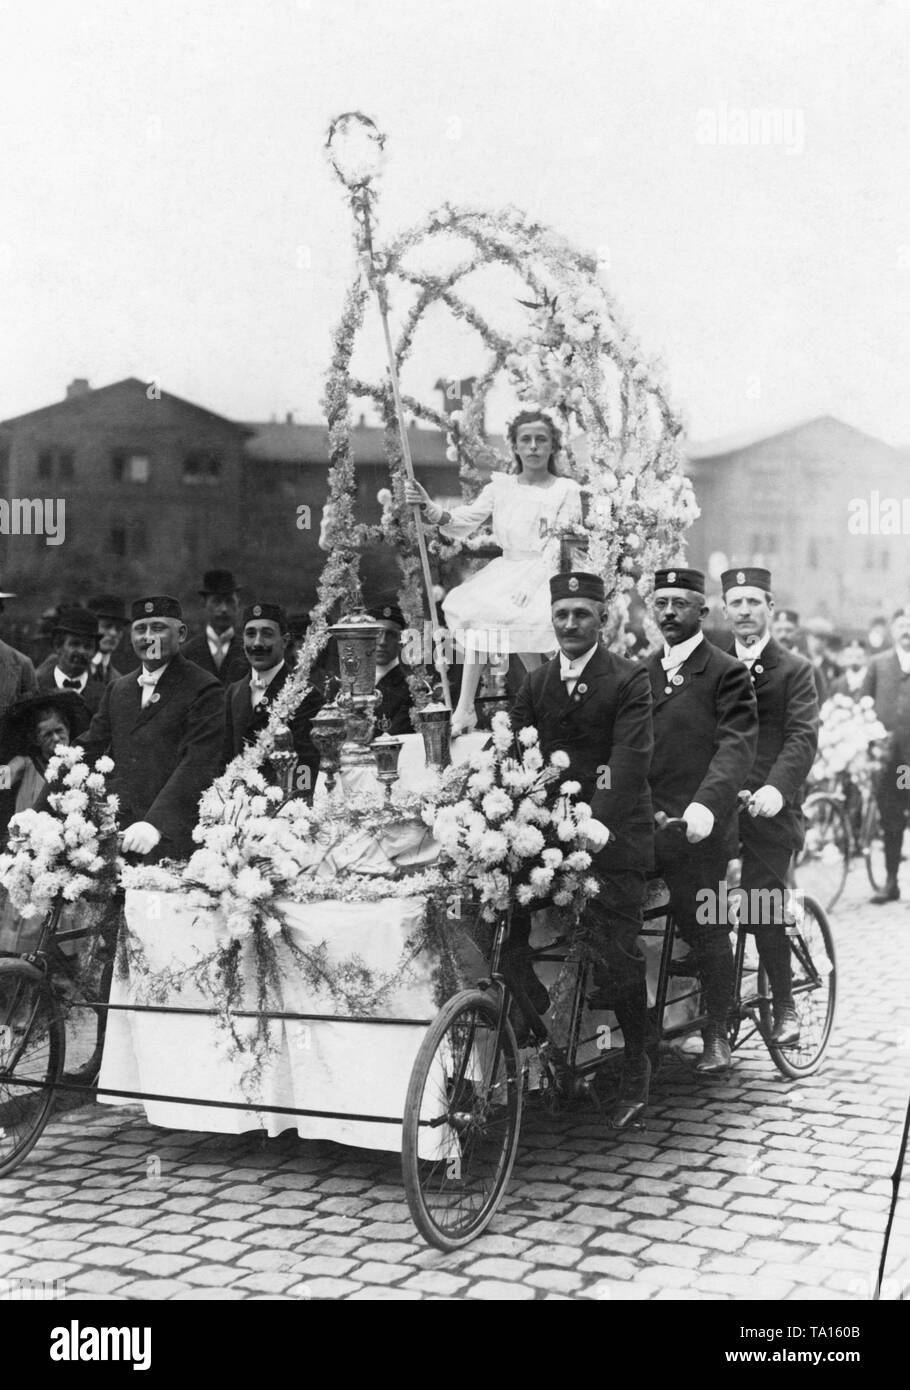 Flower-bedecked group from the pageant at the 25th Bundestag des Deutschen Radfahrerbundes (Day of the German Cycling Federation). In the middle the 'Lady of Honor'. The men drive a wheel of the brand Bessier. Stock Photo